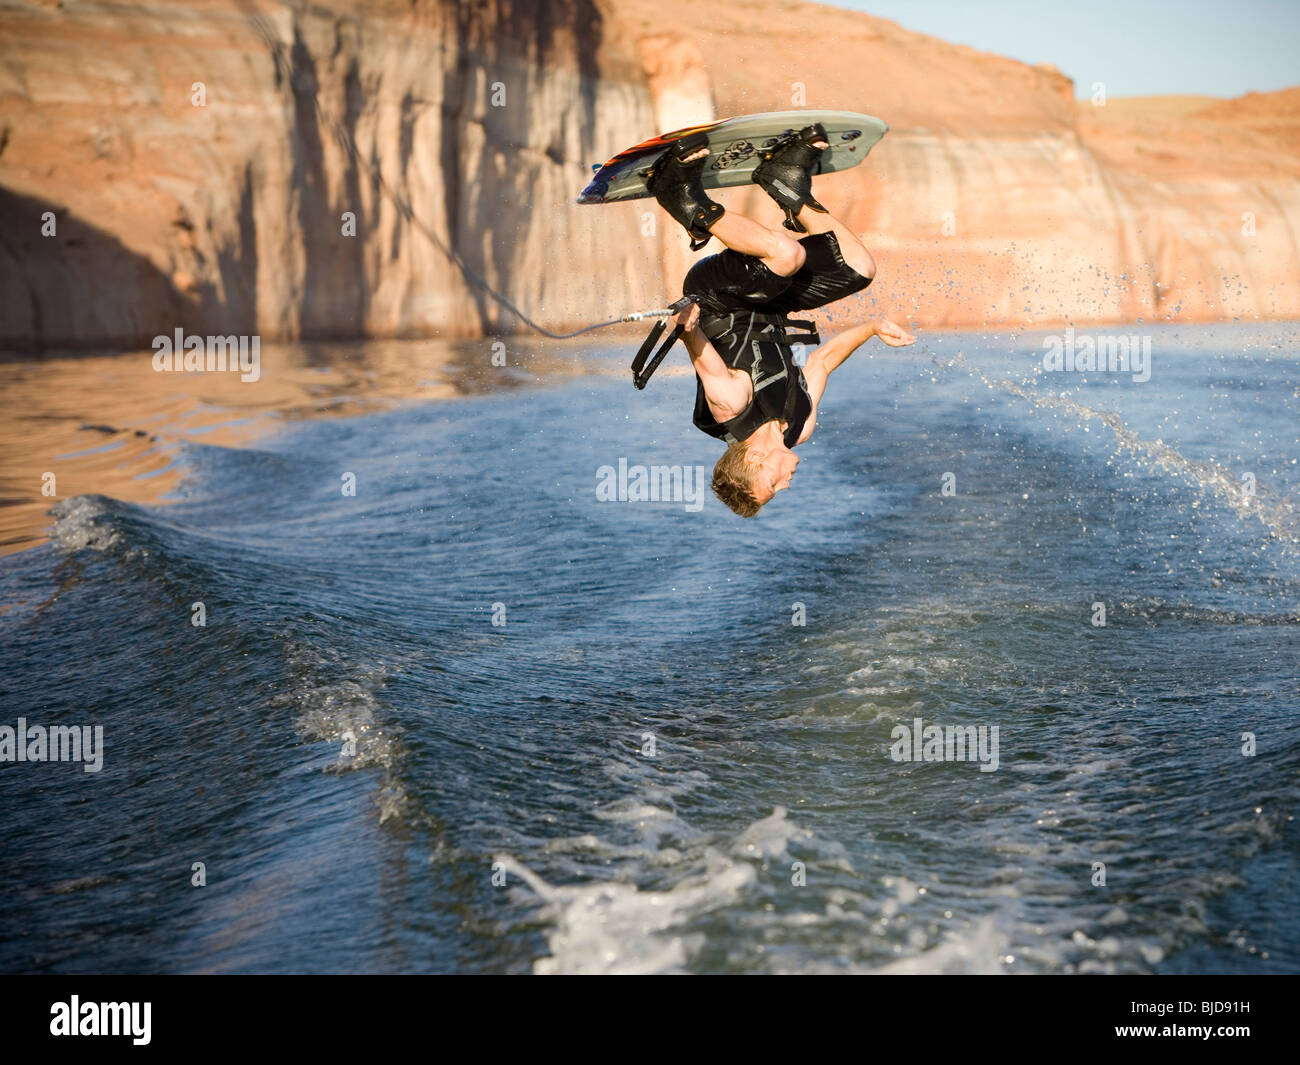 Man on a wakeboard. Stock Photo